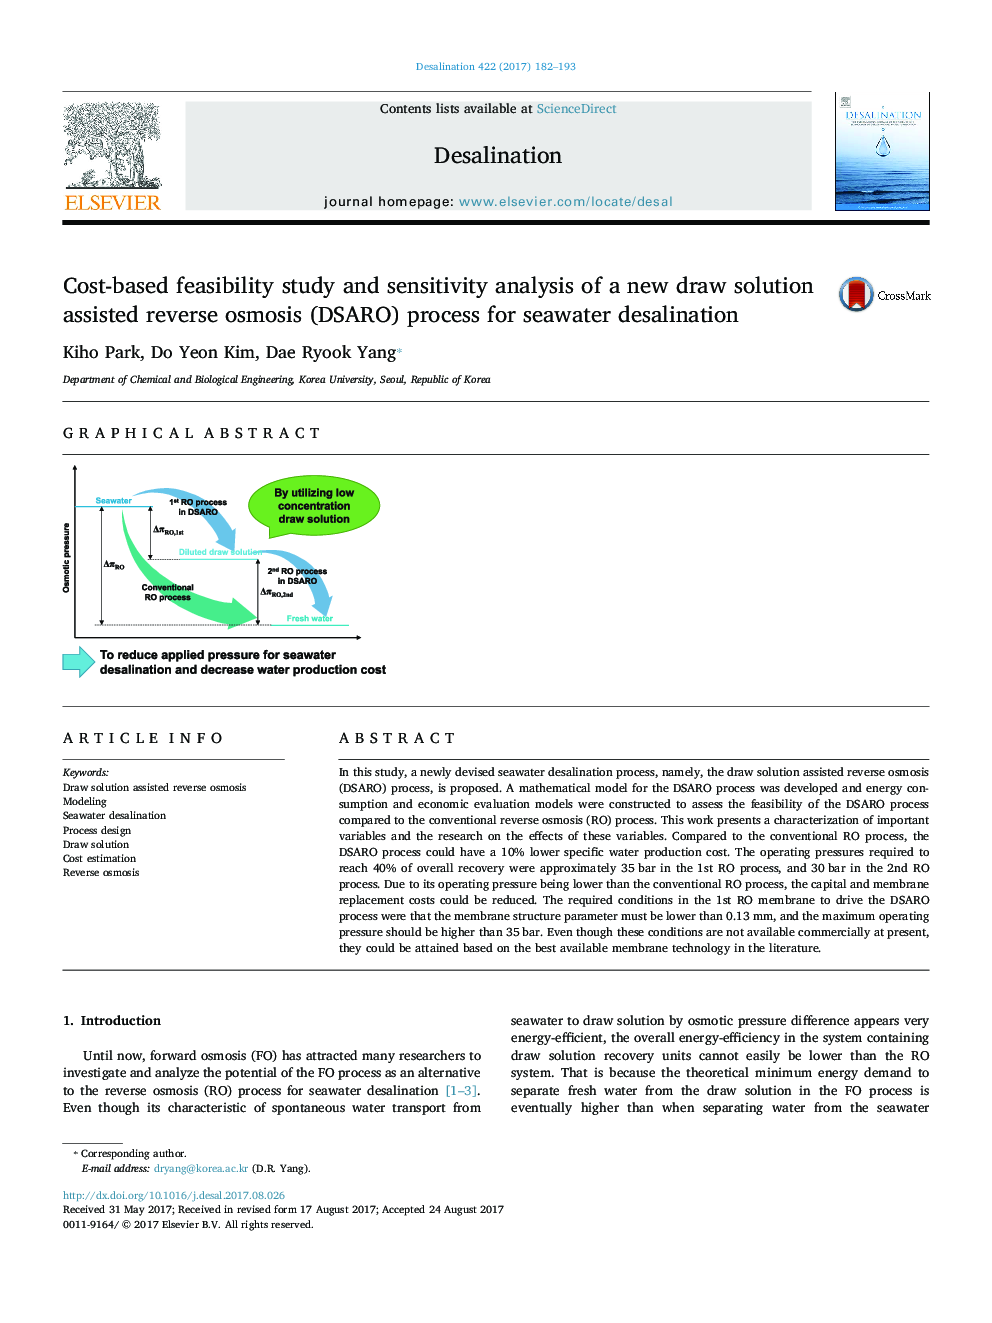 Cost-based feasibility study and sensitivity analysis of a new draw solution assisted reverse osmosis (DSARO) process for seawater desalination